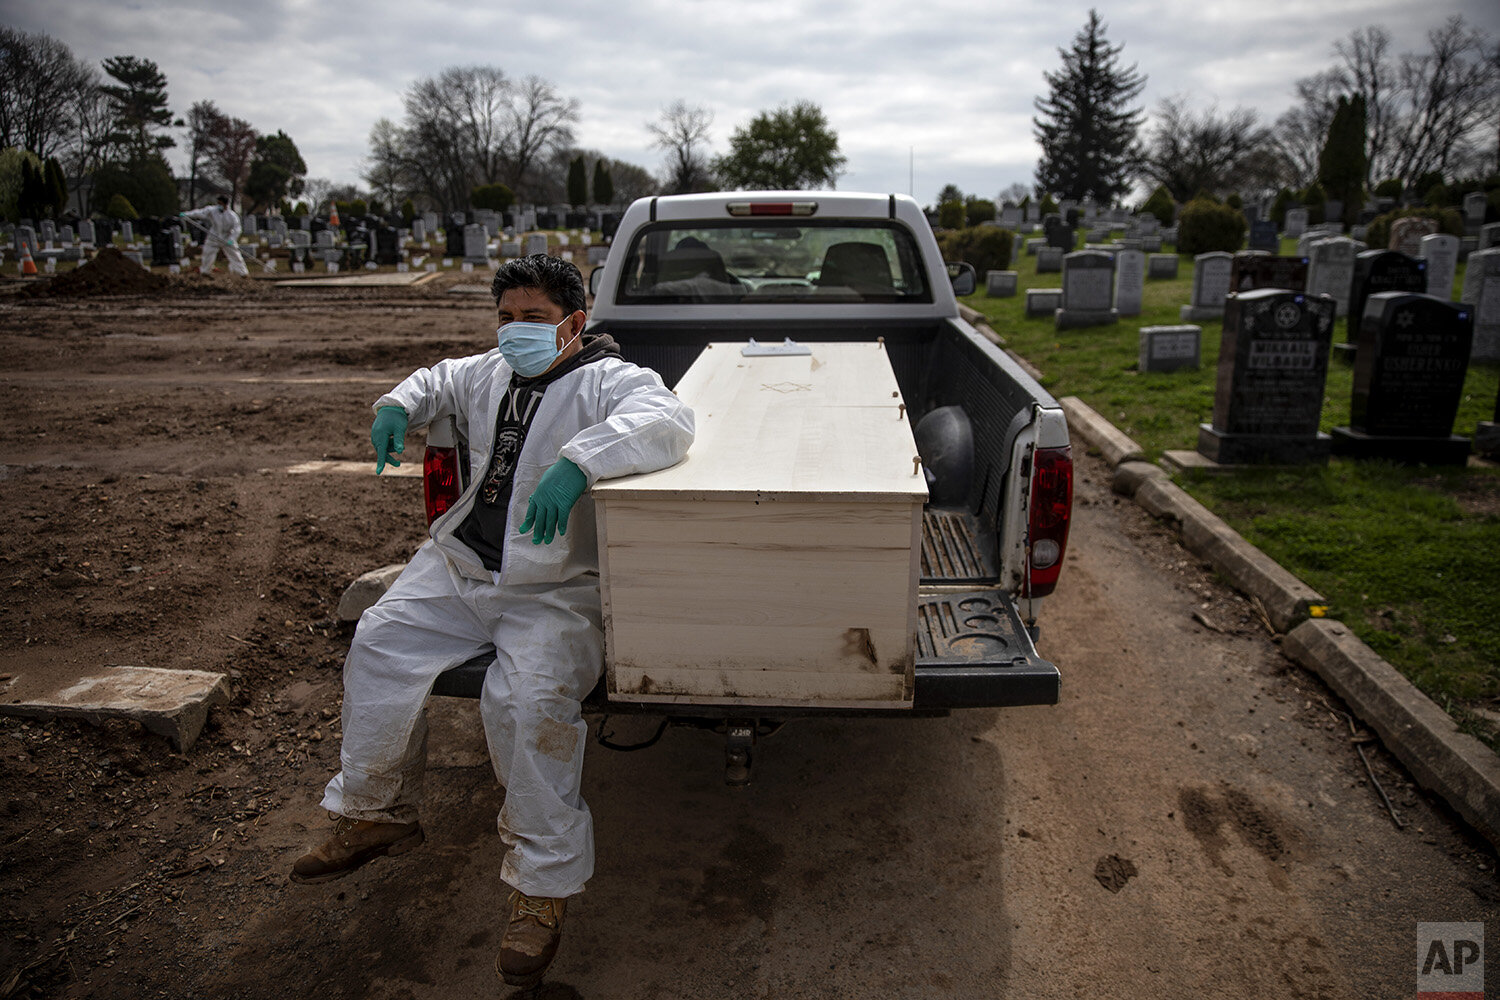  Gravedigger Thomas Cortez accompanies a casket as it's brought to the plot for burial at Hebrew Free Burial Association's Mount Richmond Cemetery in the Staten Island borough of New York, Wednesday, April 8, 2020. The group serves Jews who mostly di